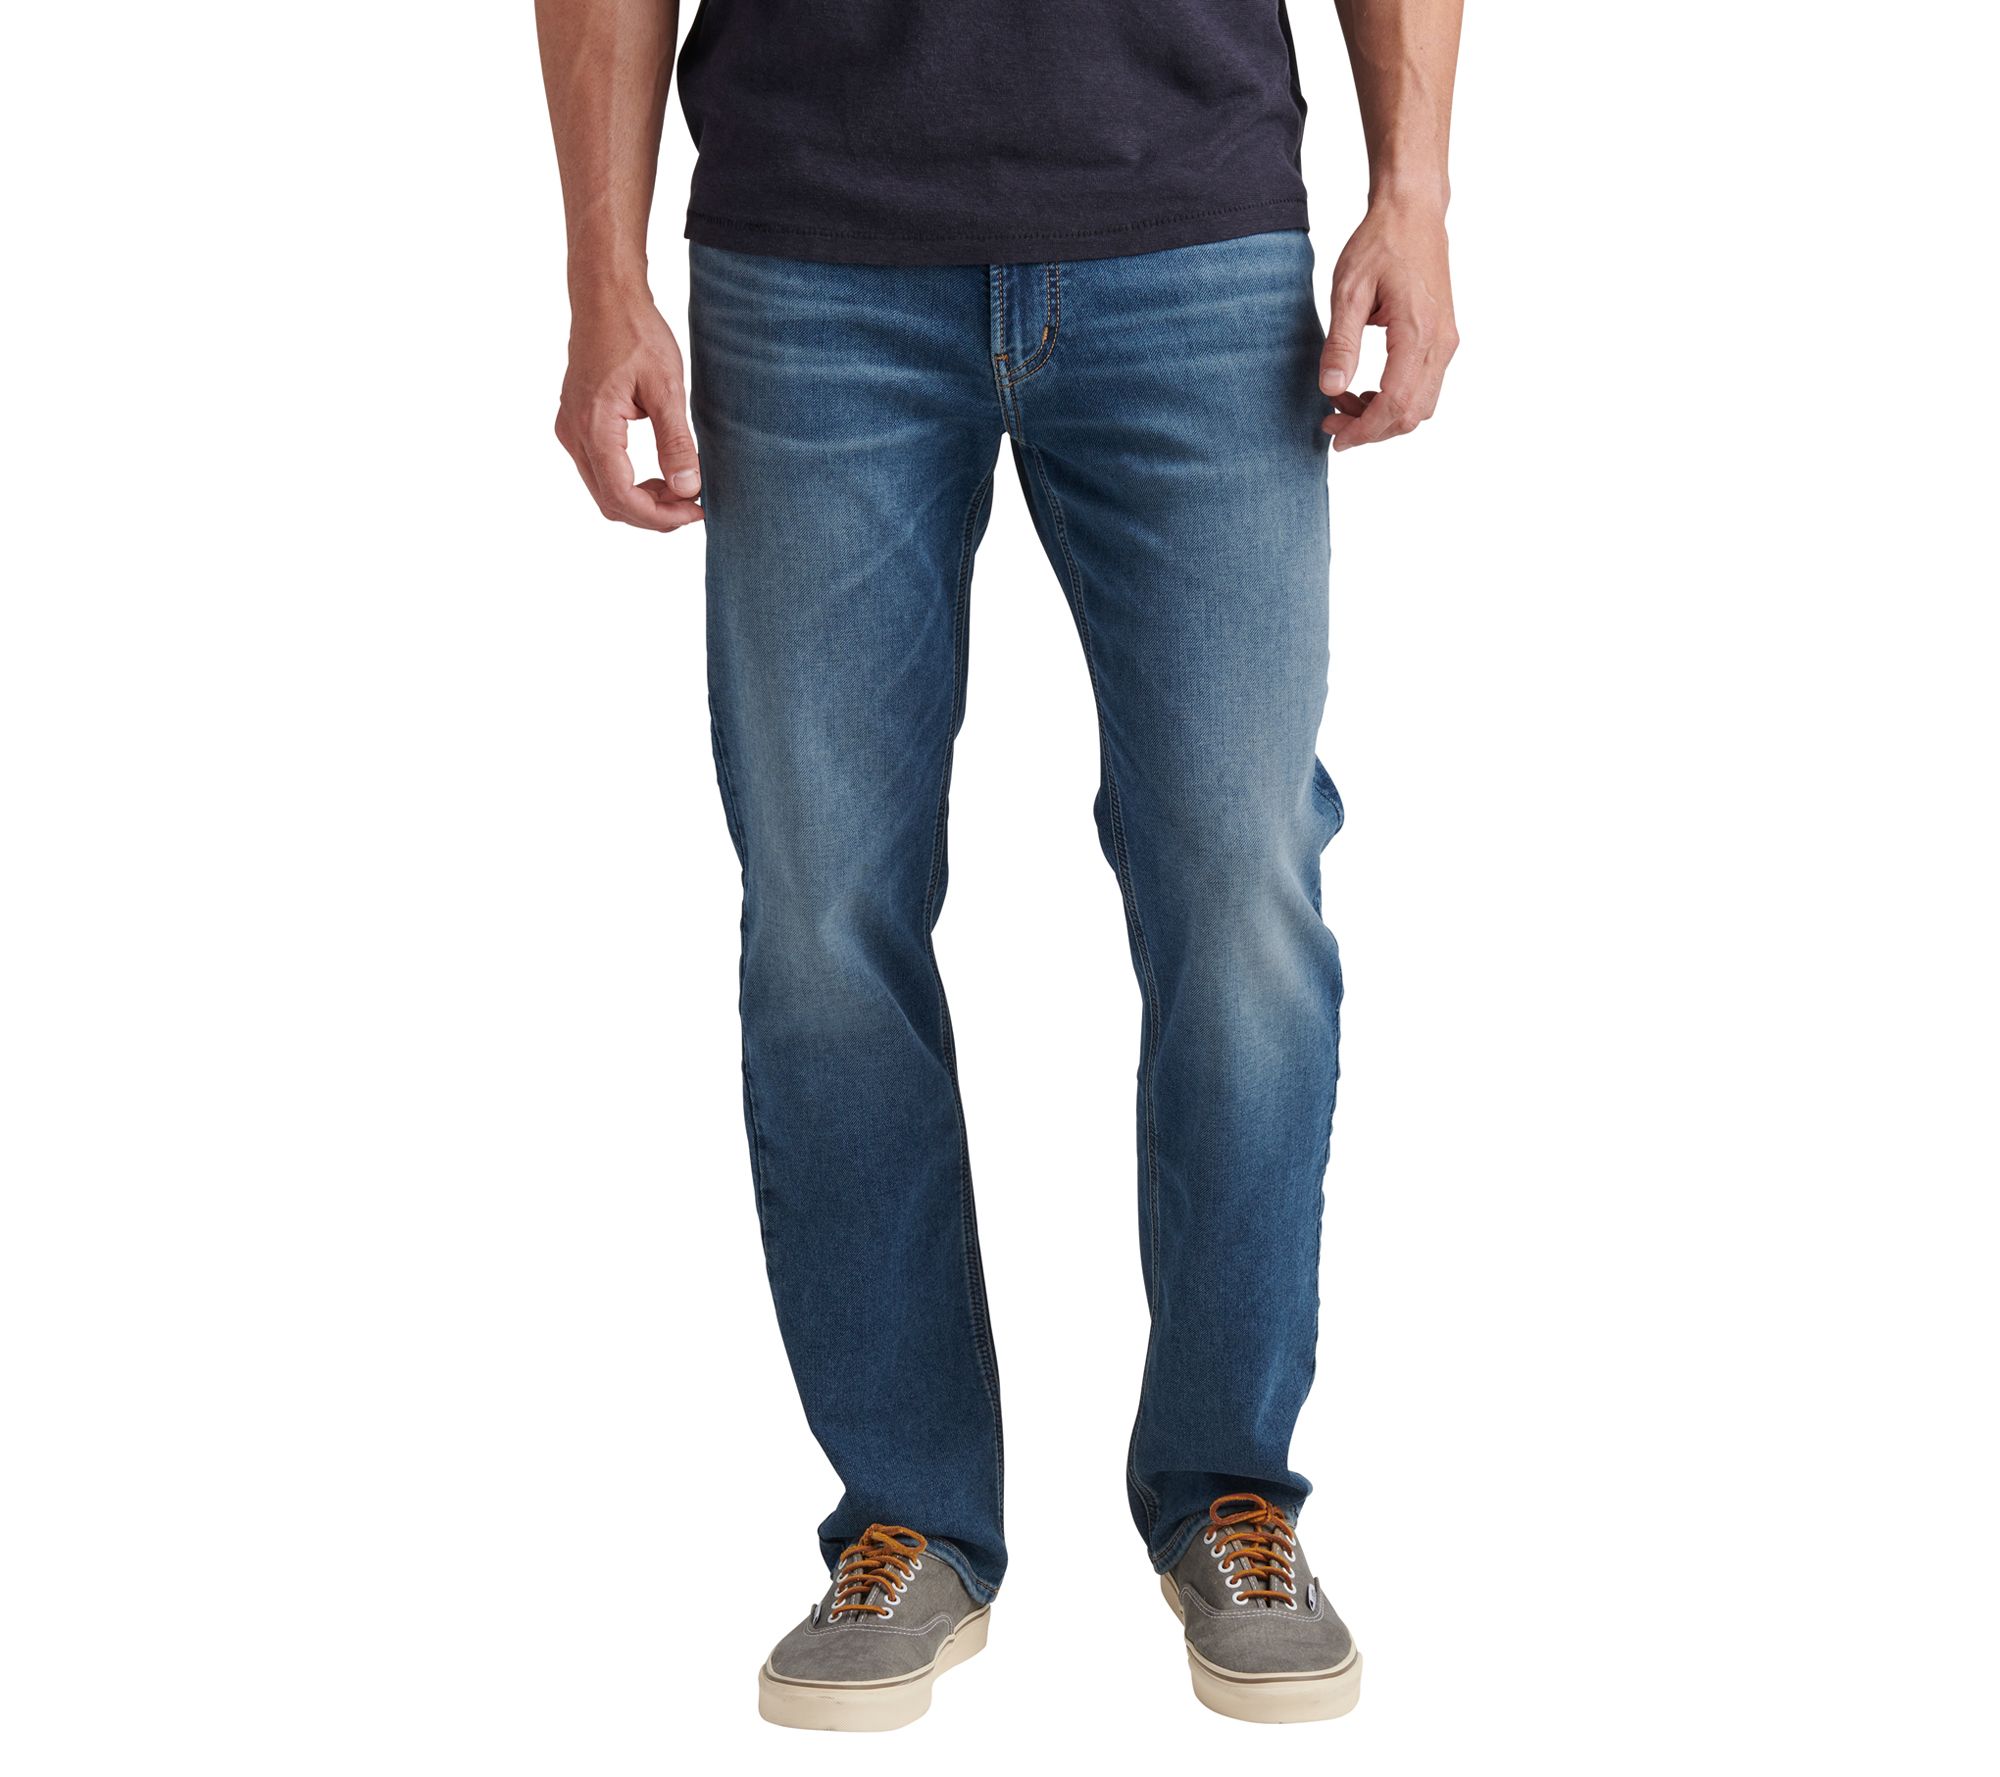 Silver Jeans Co. Men's The Relaxed Straight Leg Jeans - AJI397 - QVC.com